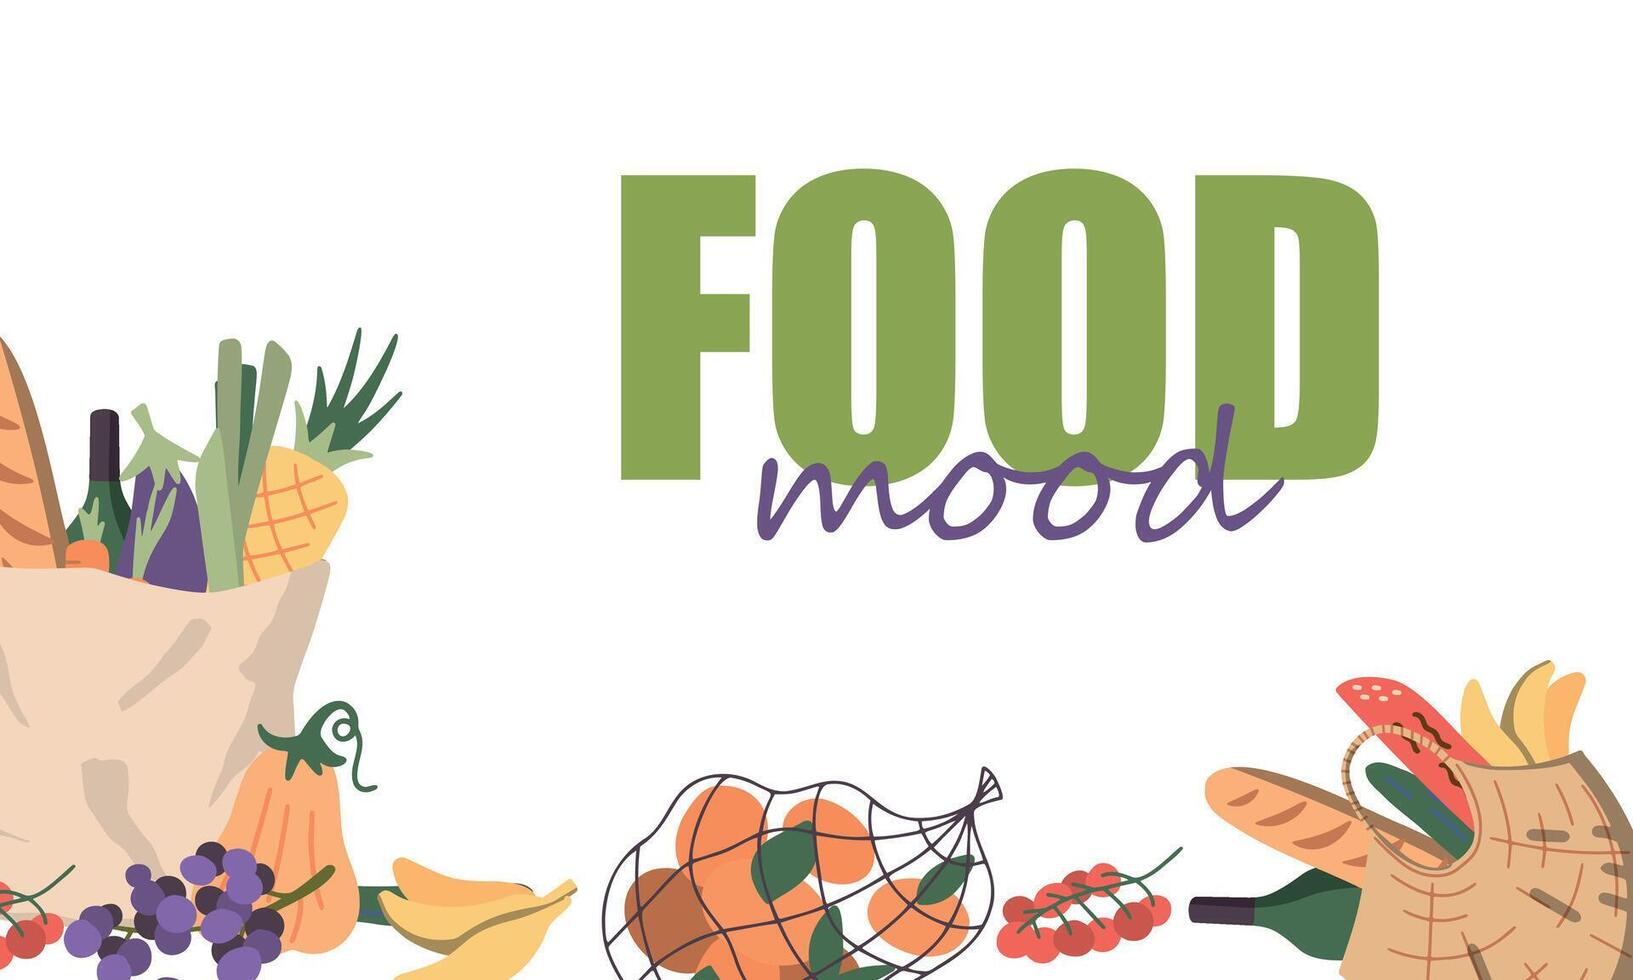 frame for text. Vector illustration in cartoon style of a paper bag full of natural organic vegetables and fruits and other products